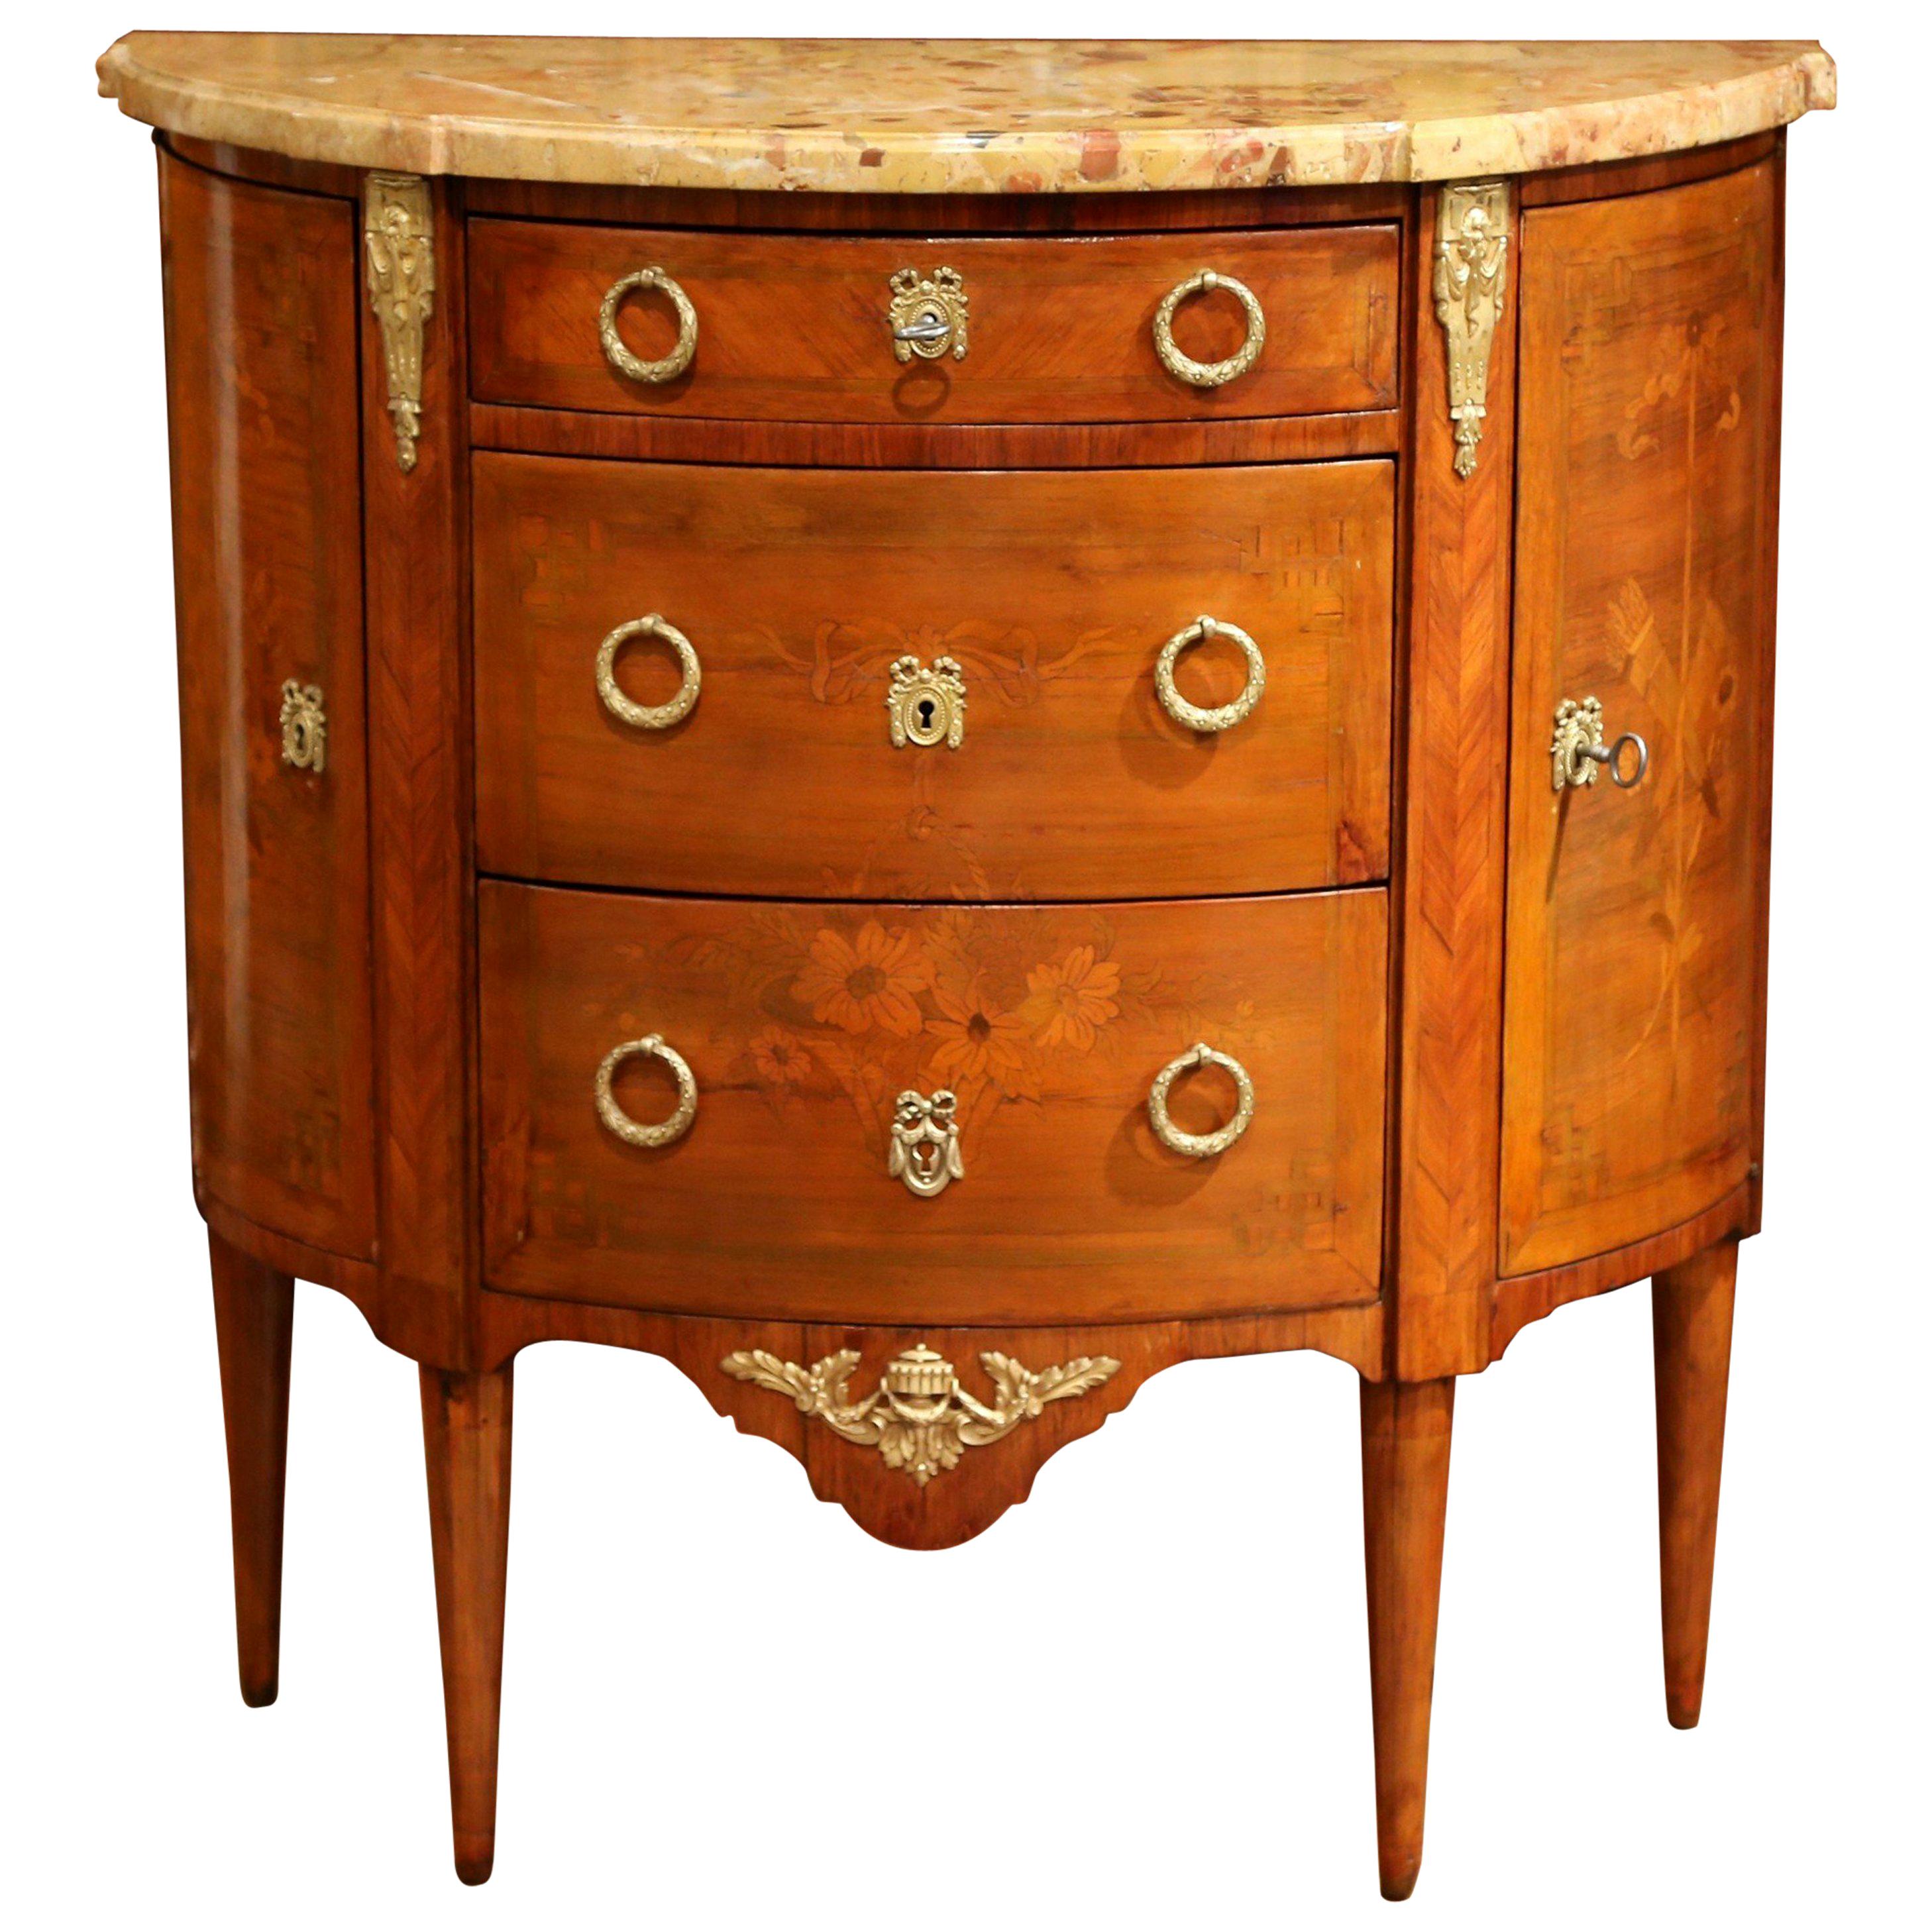 19th Century French Louis XVI Bombe Demilune Marquetry Commode with Marble Top